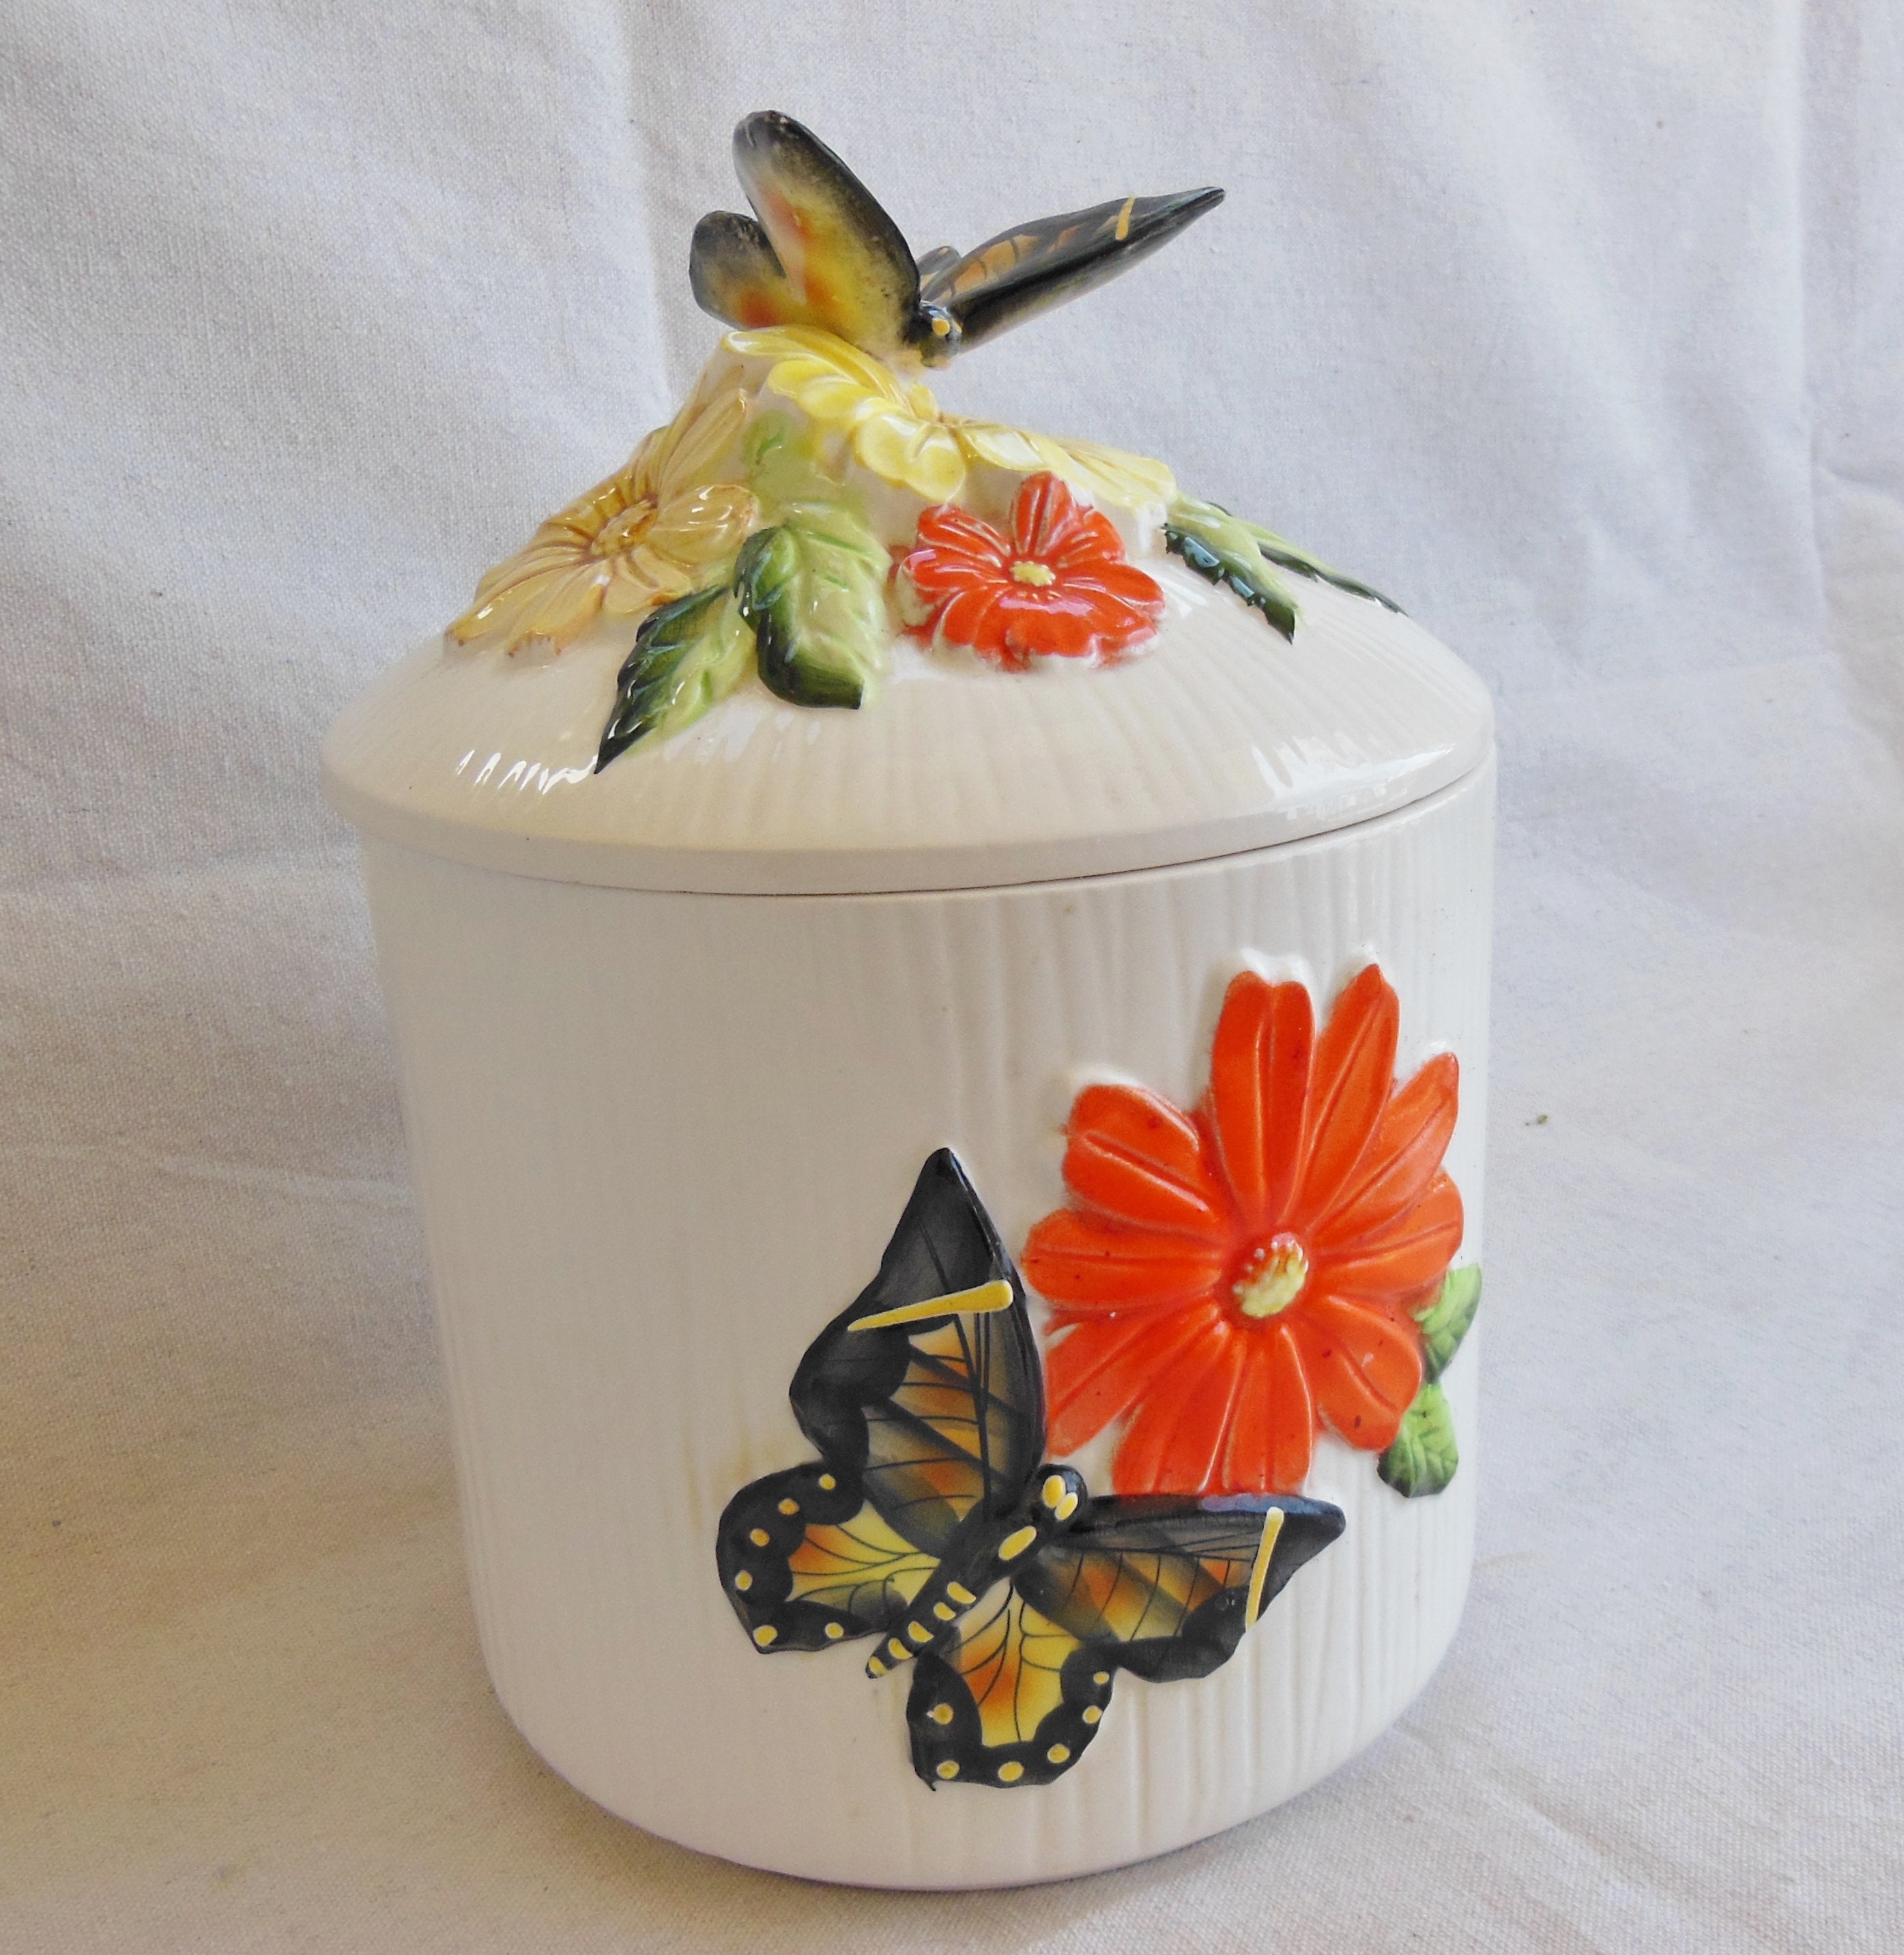 Lonovel Vintage Ceramic Cookies Jars,Retro Bird and Flower Design,Large  Kitchen Organization Storage Canister with Airtight Lid,Seal Canister for  Food